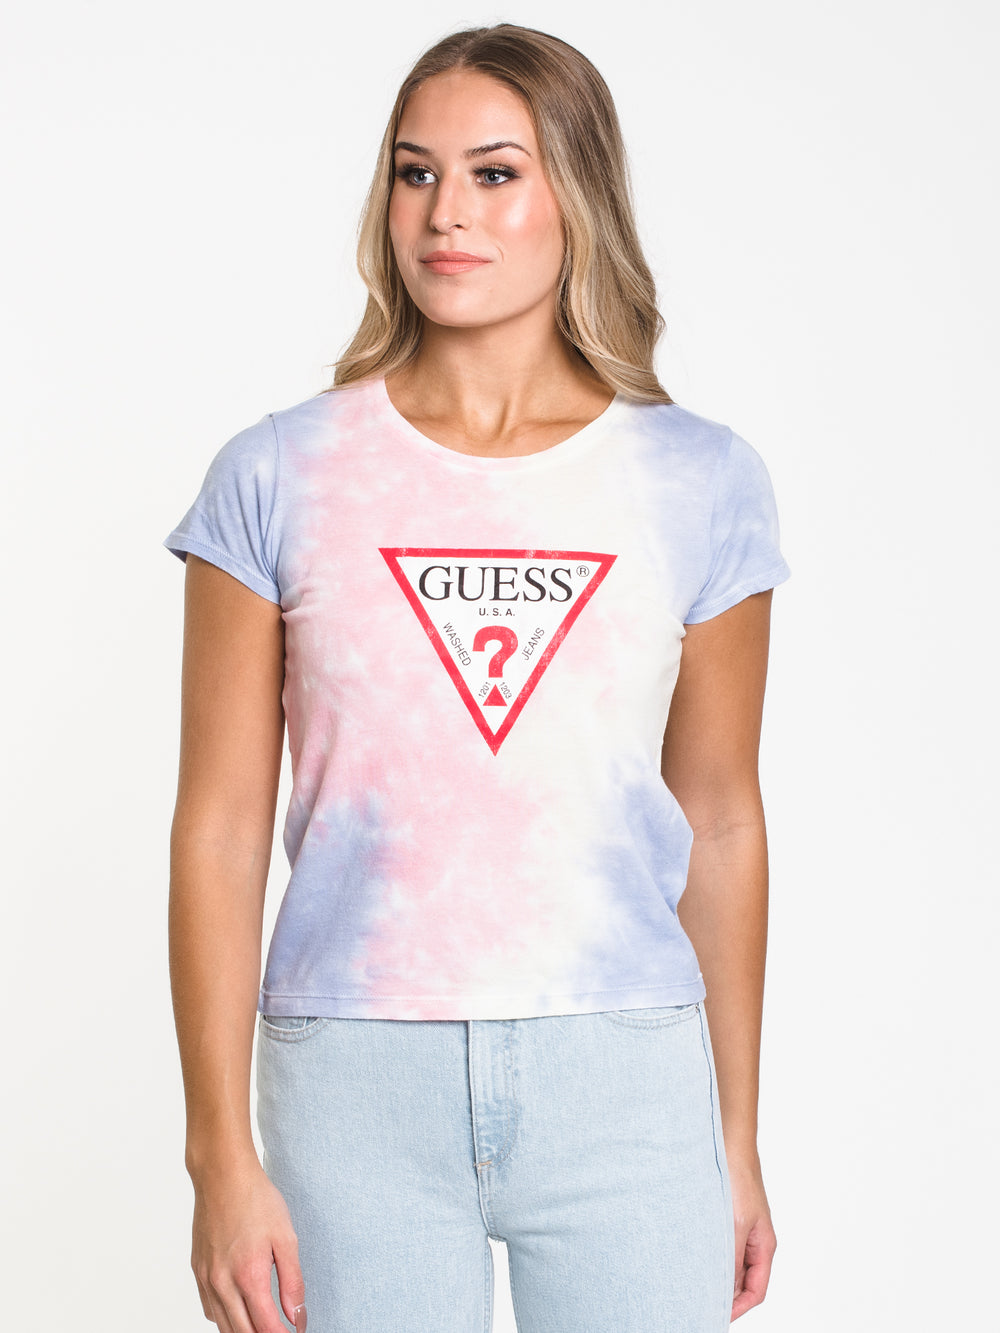 GUESS LOGO BABY T-SHIRT  - CLEARANCE